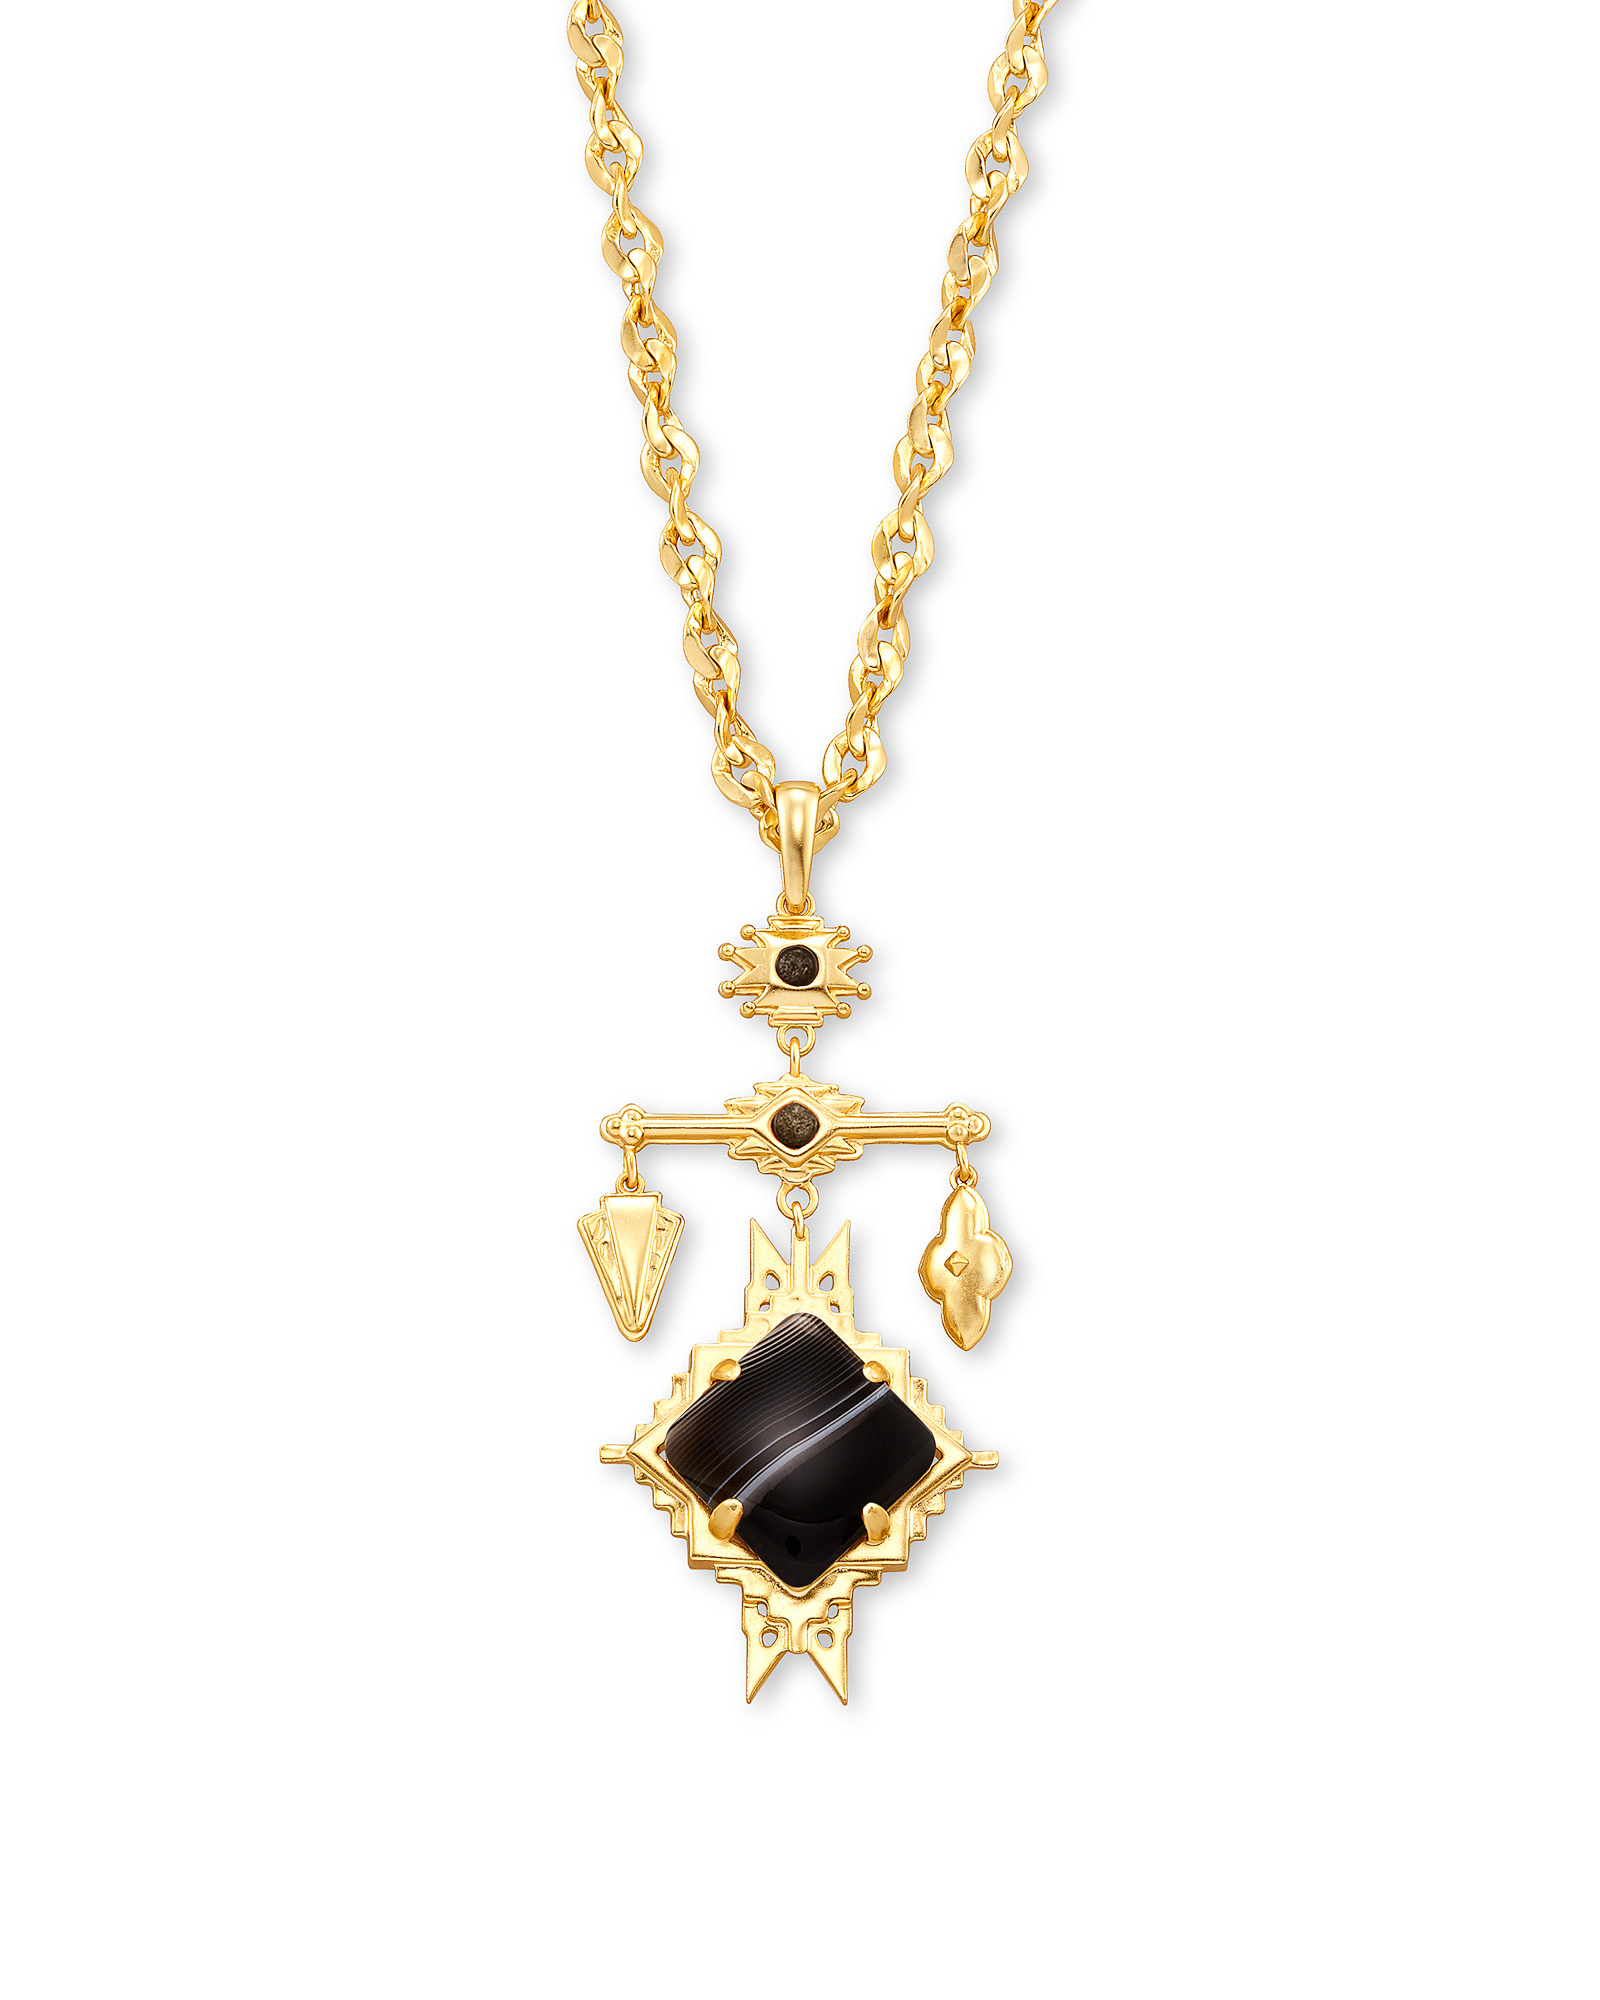 Cass Gold Large Long Pendant Necklace in Black Banded Agate | Kendra Scott